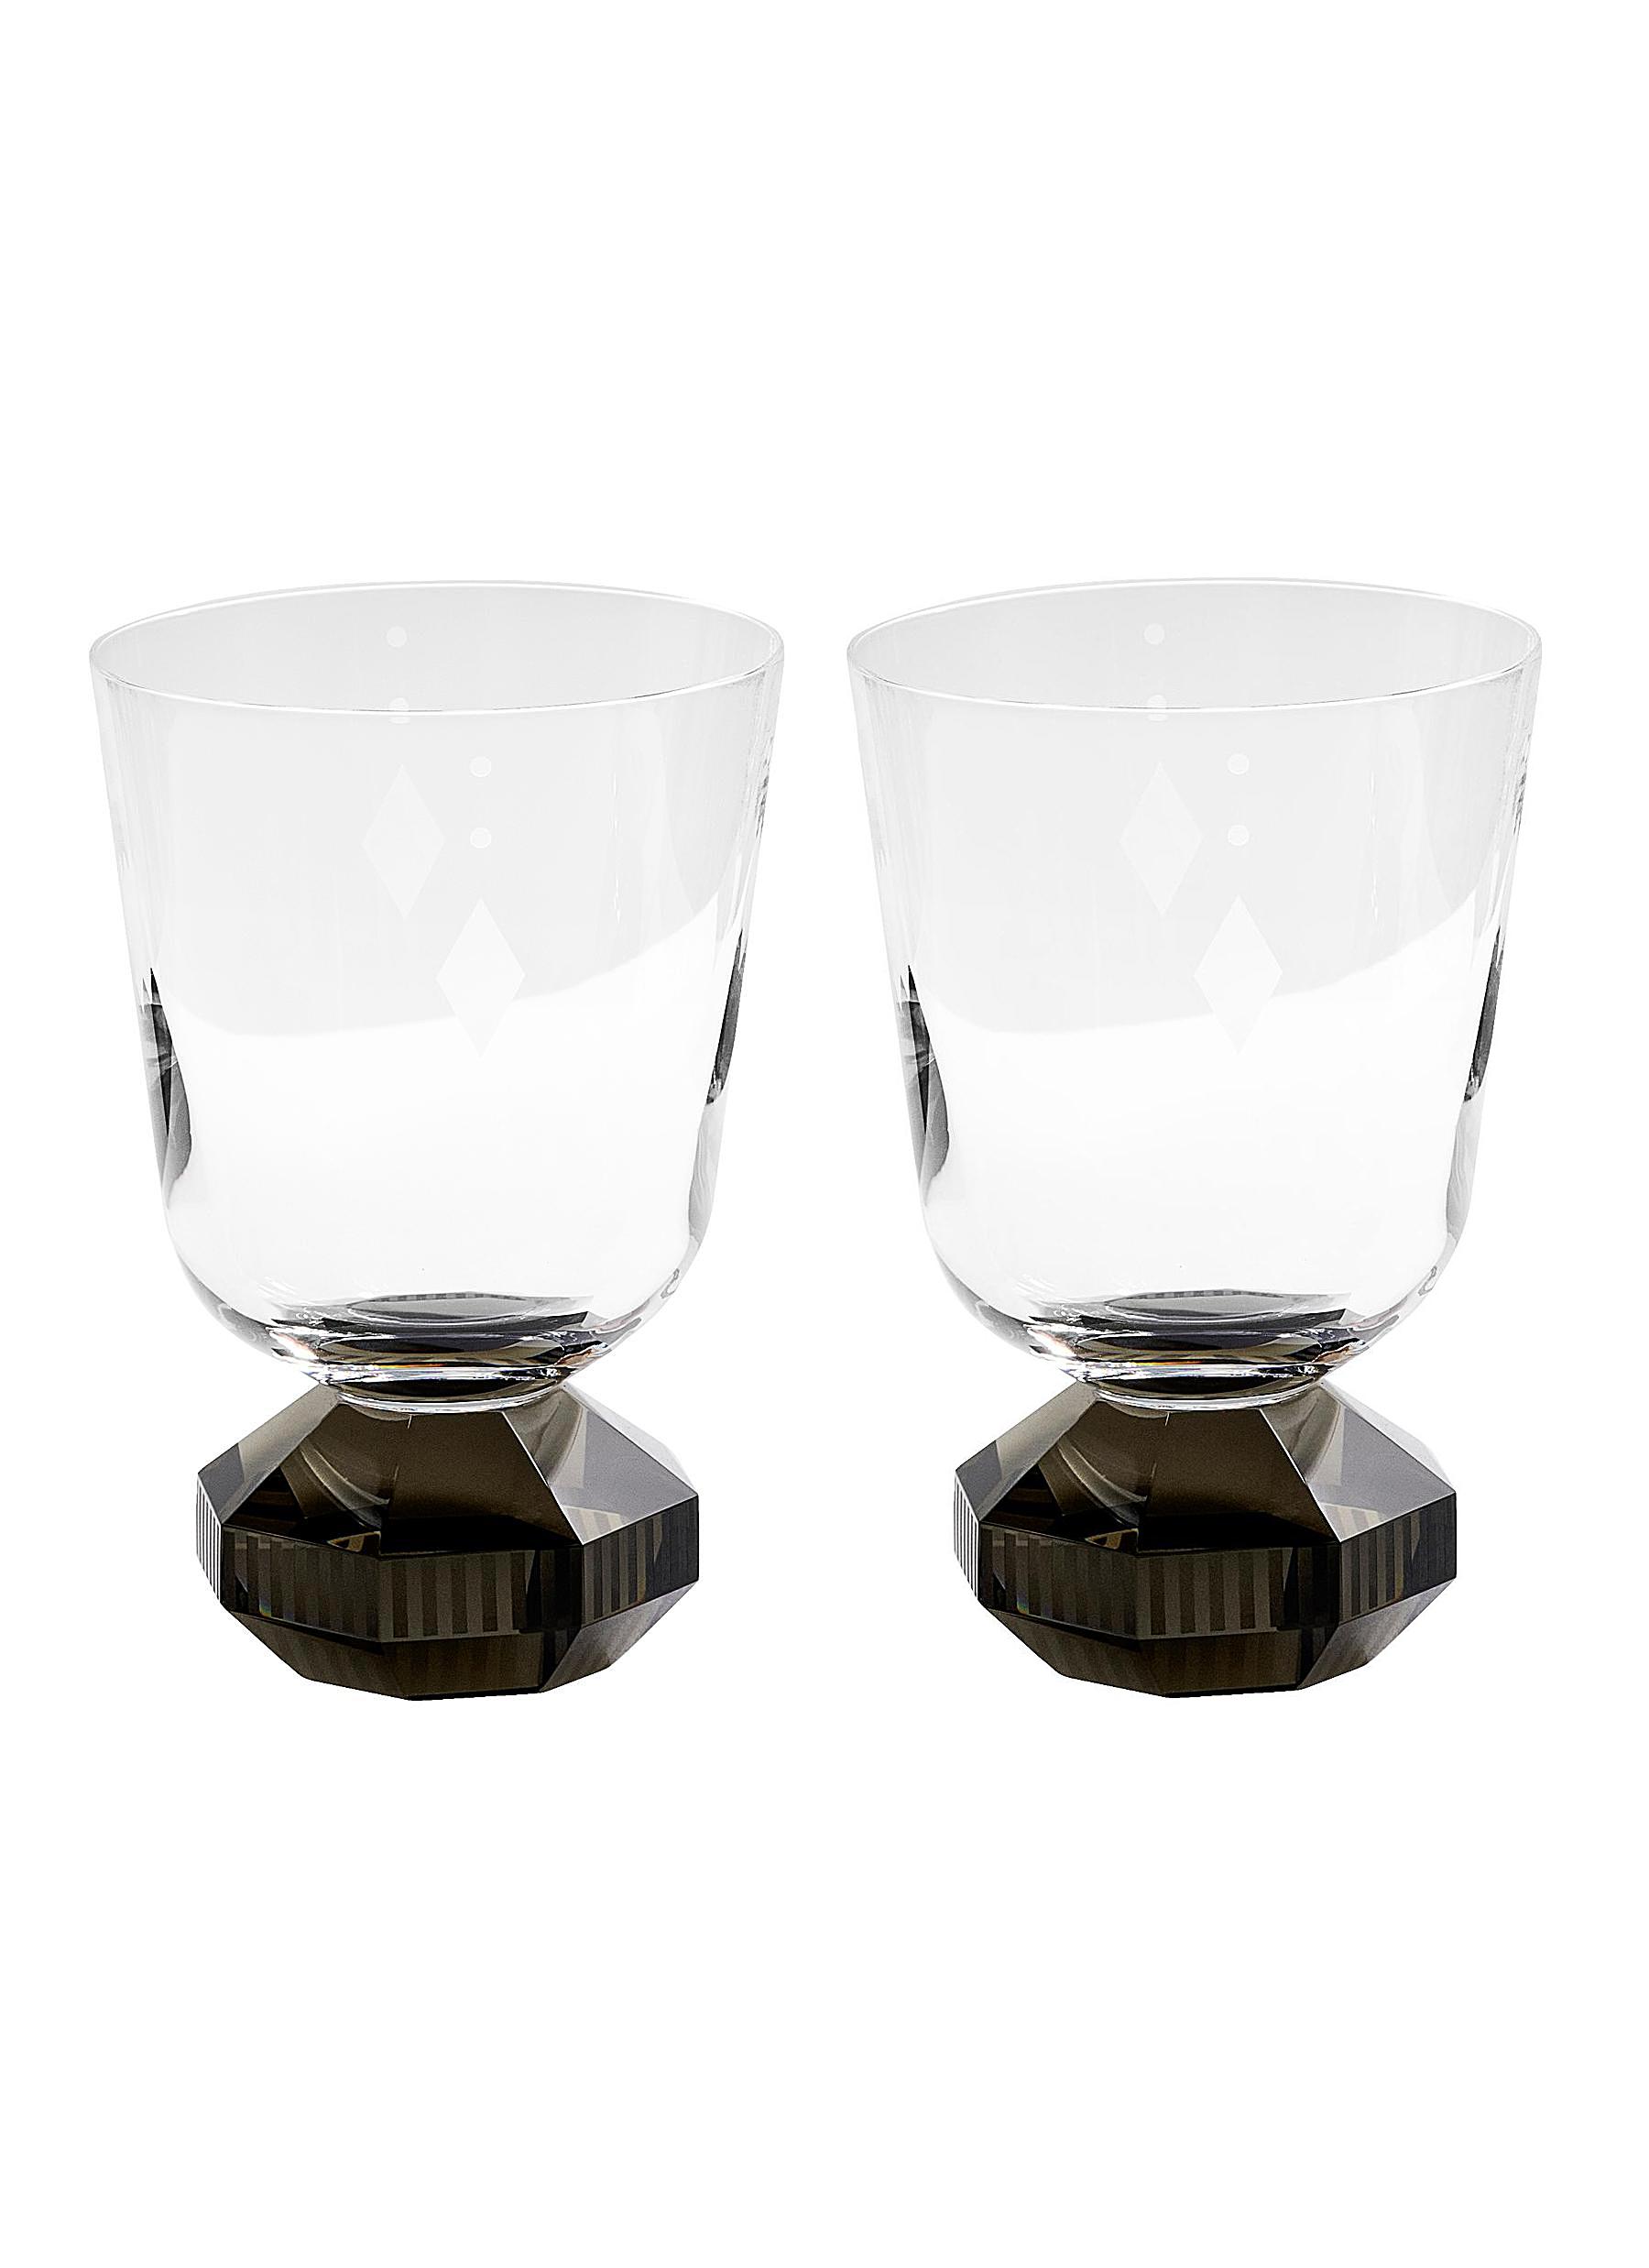 CHELSEA LOW CRYSTAL GLASS SET OF 2 - GREY